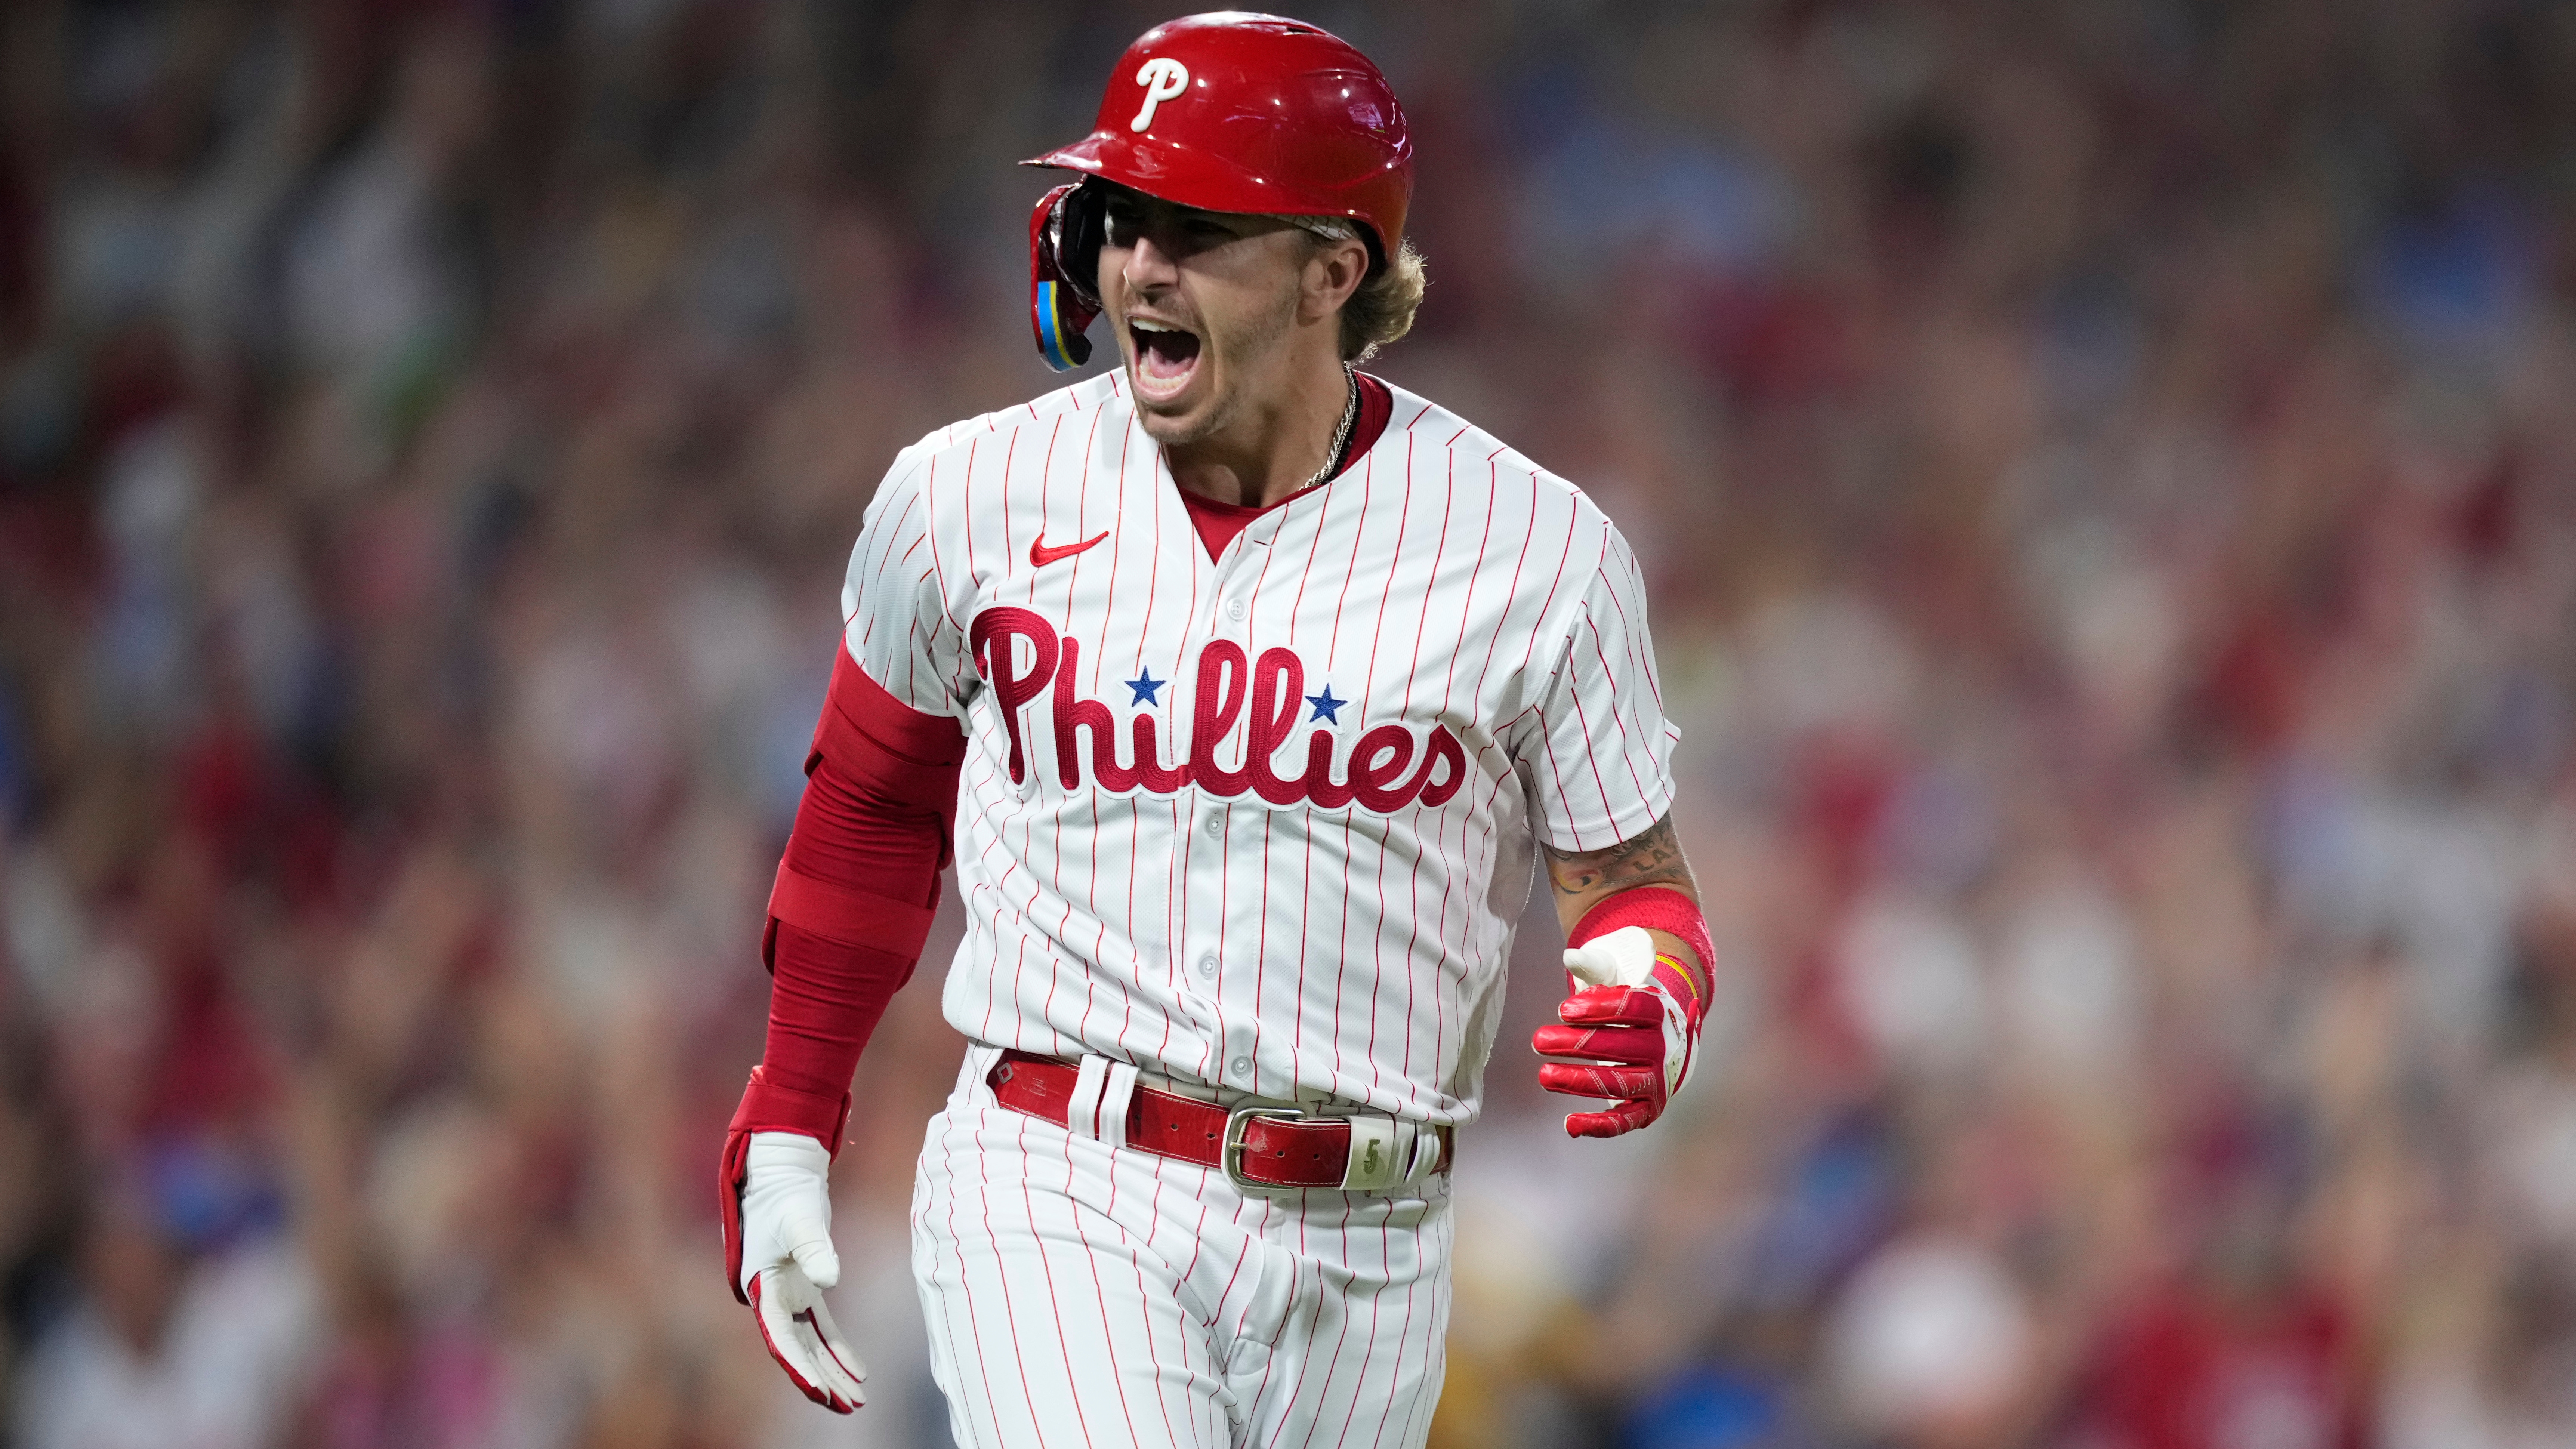 Philadelphia Phillies Opening Day 2022: Here's everything you need